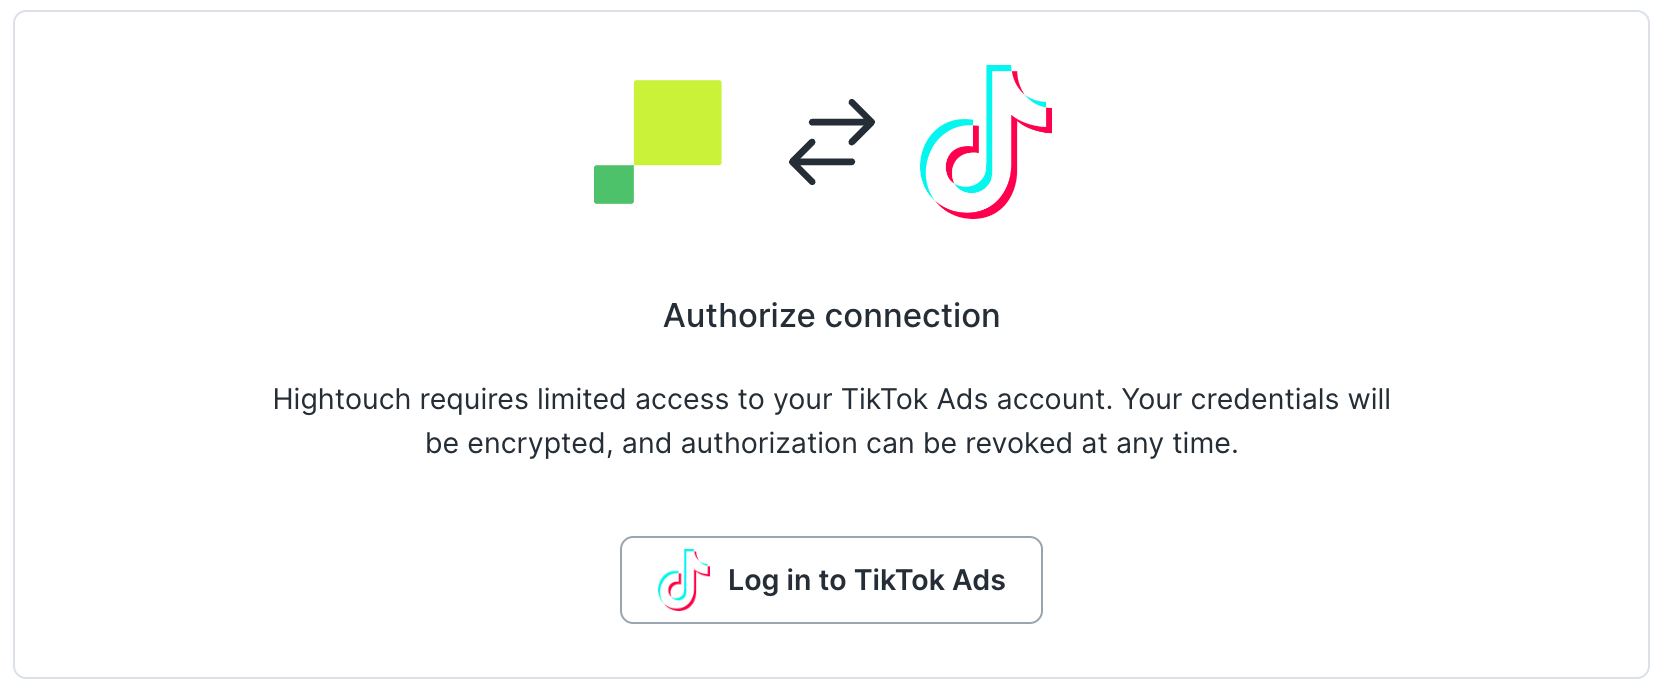 Authenticating to TikTok in Hightouch